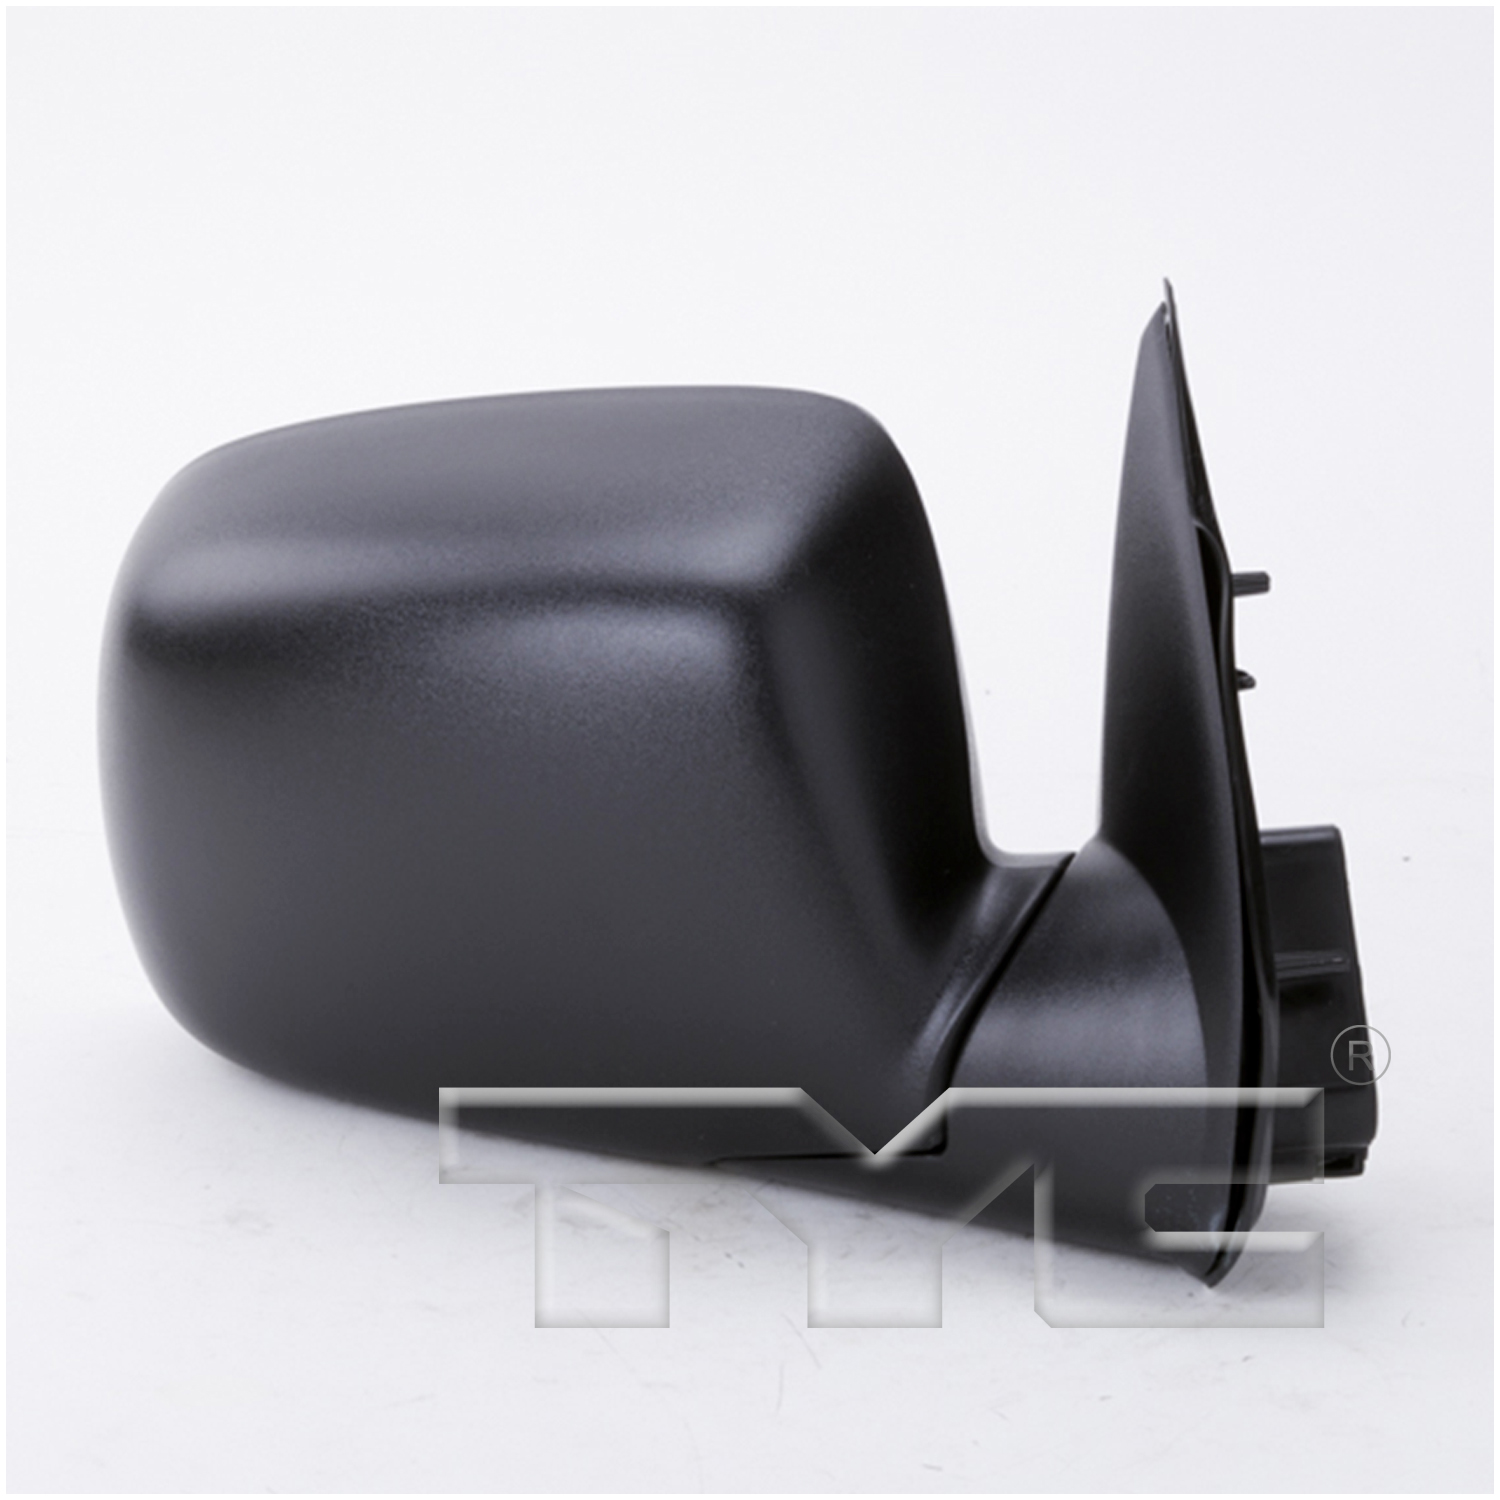 Aftermarket MIRRORS for CHEVROLET - COLORADO, COLORADO,04-12,RT Mirror outside rear view